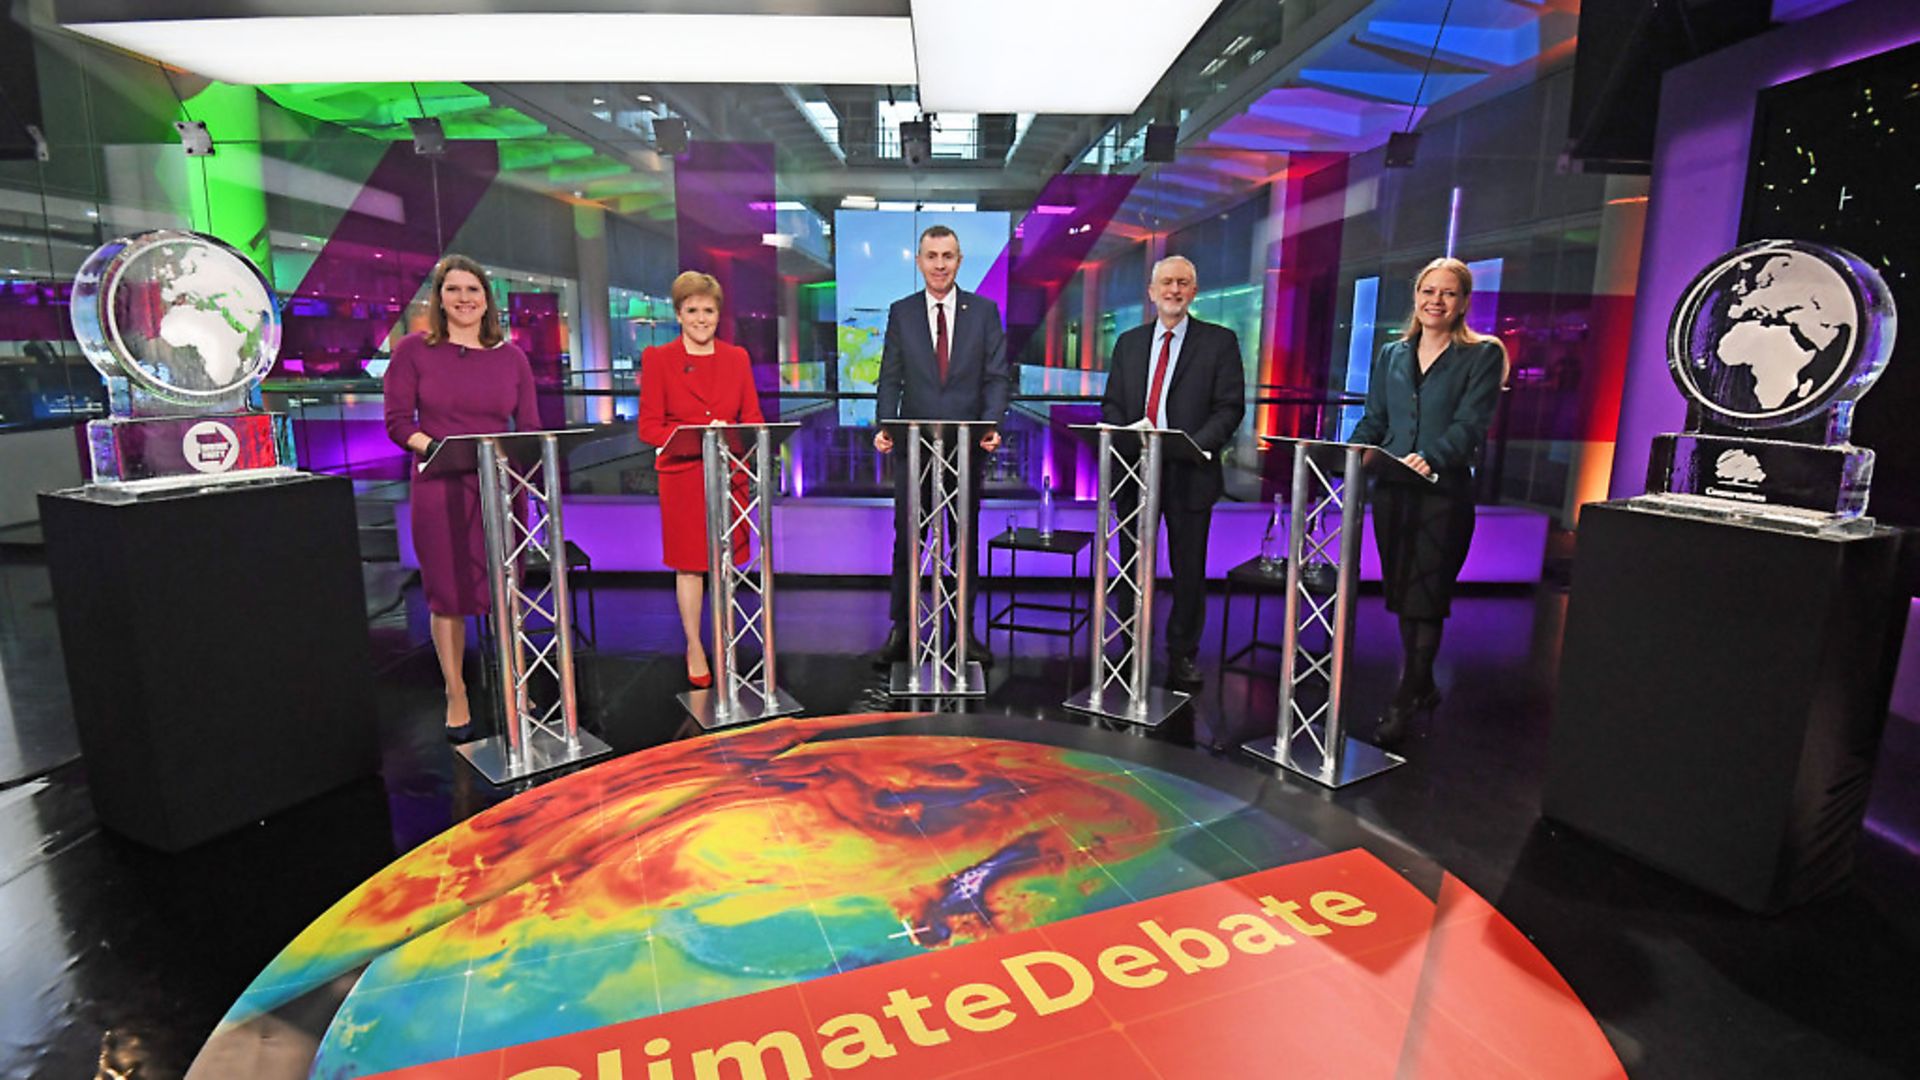 (left to right) Liberal Democrat leader Jo Swinson, SNP leader Nicola Sturgeon, Plaid Cymru leader Adam Price and Green Party Co-Leader Sian Berry, stand next to ice sculptures representing the Brexit Party and Conservative Party at a Channel 4 climate debate. Photograph: Kirsty O'Connor/PA Wire. - Credit: PA